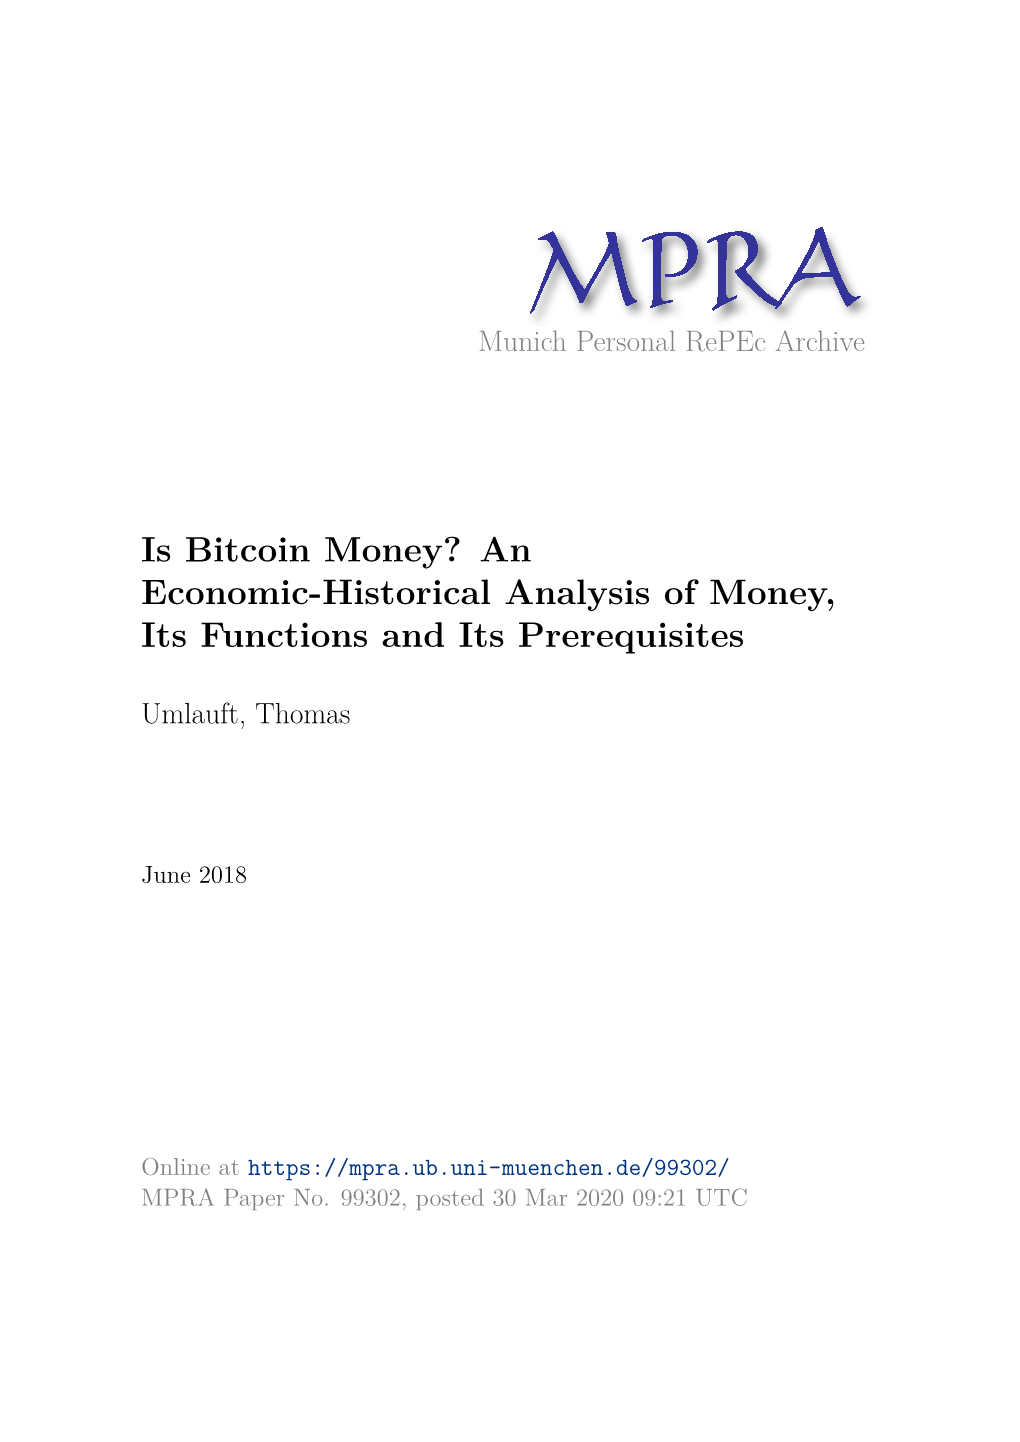 Is Bitcoin Money? an Economic-Historical Analysis of Money, Its Functions and Its Prerequisites